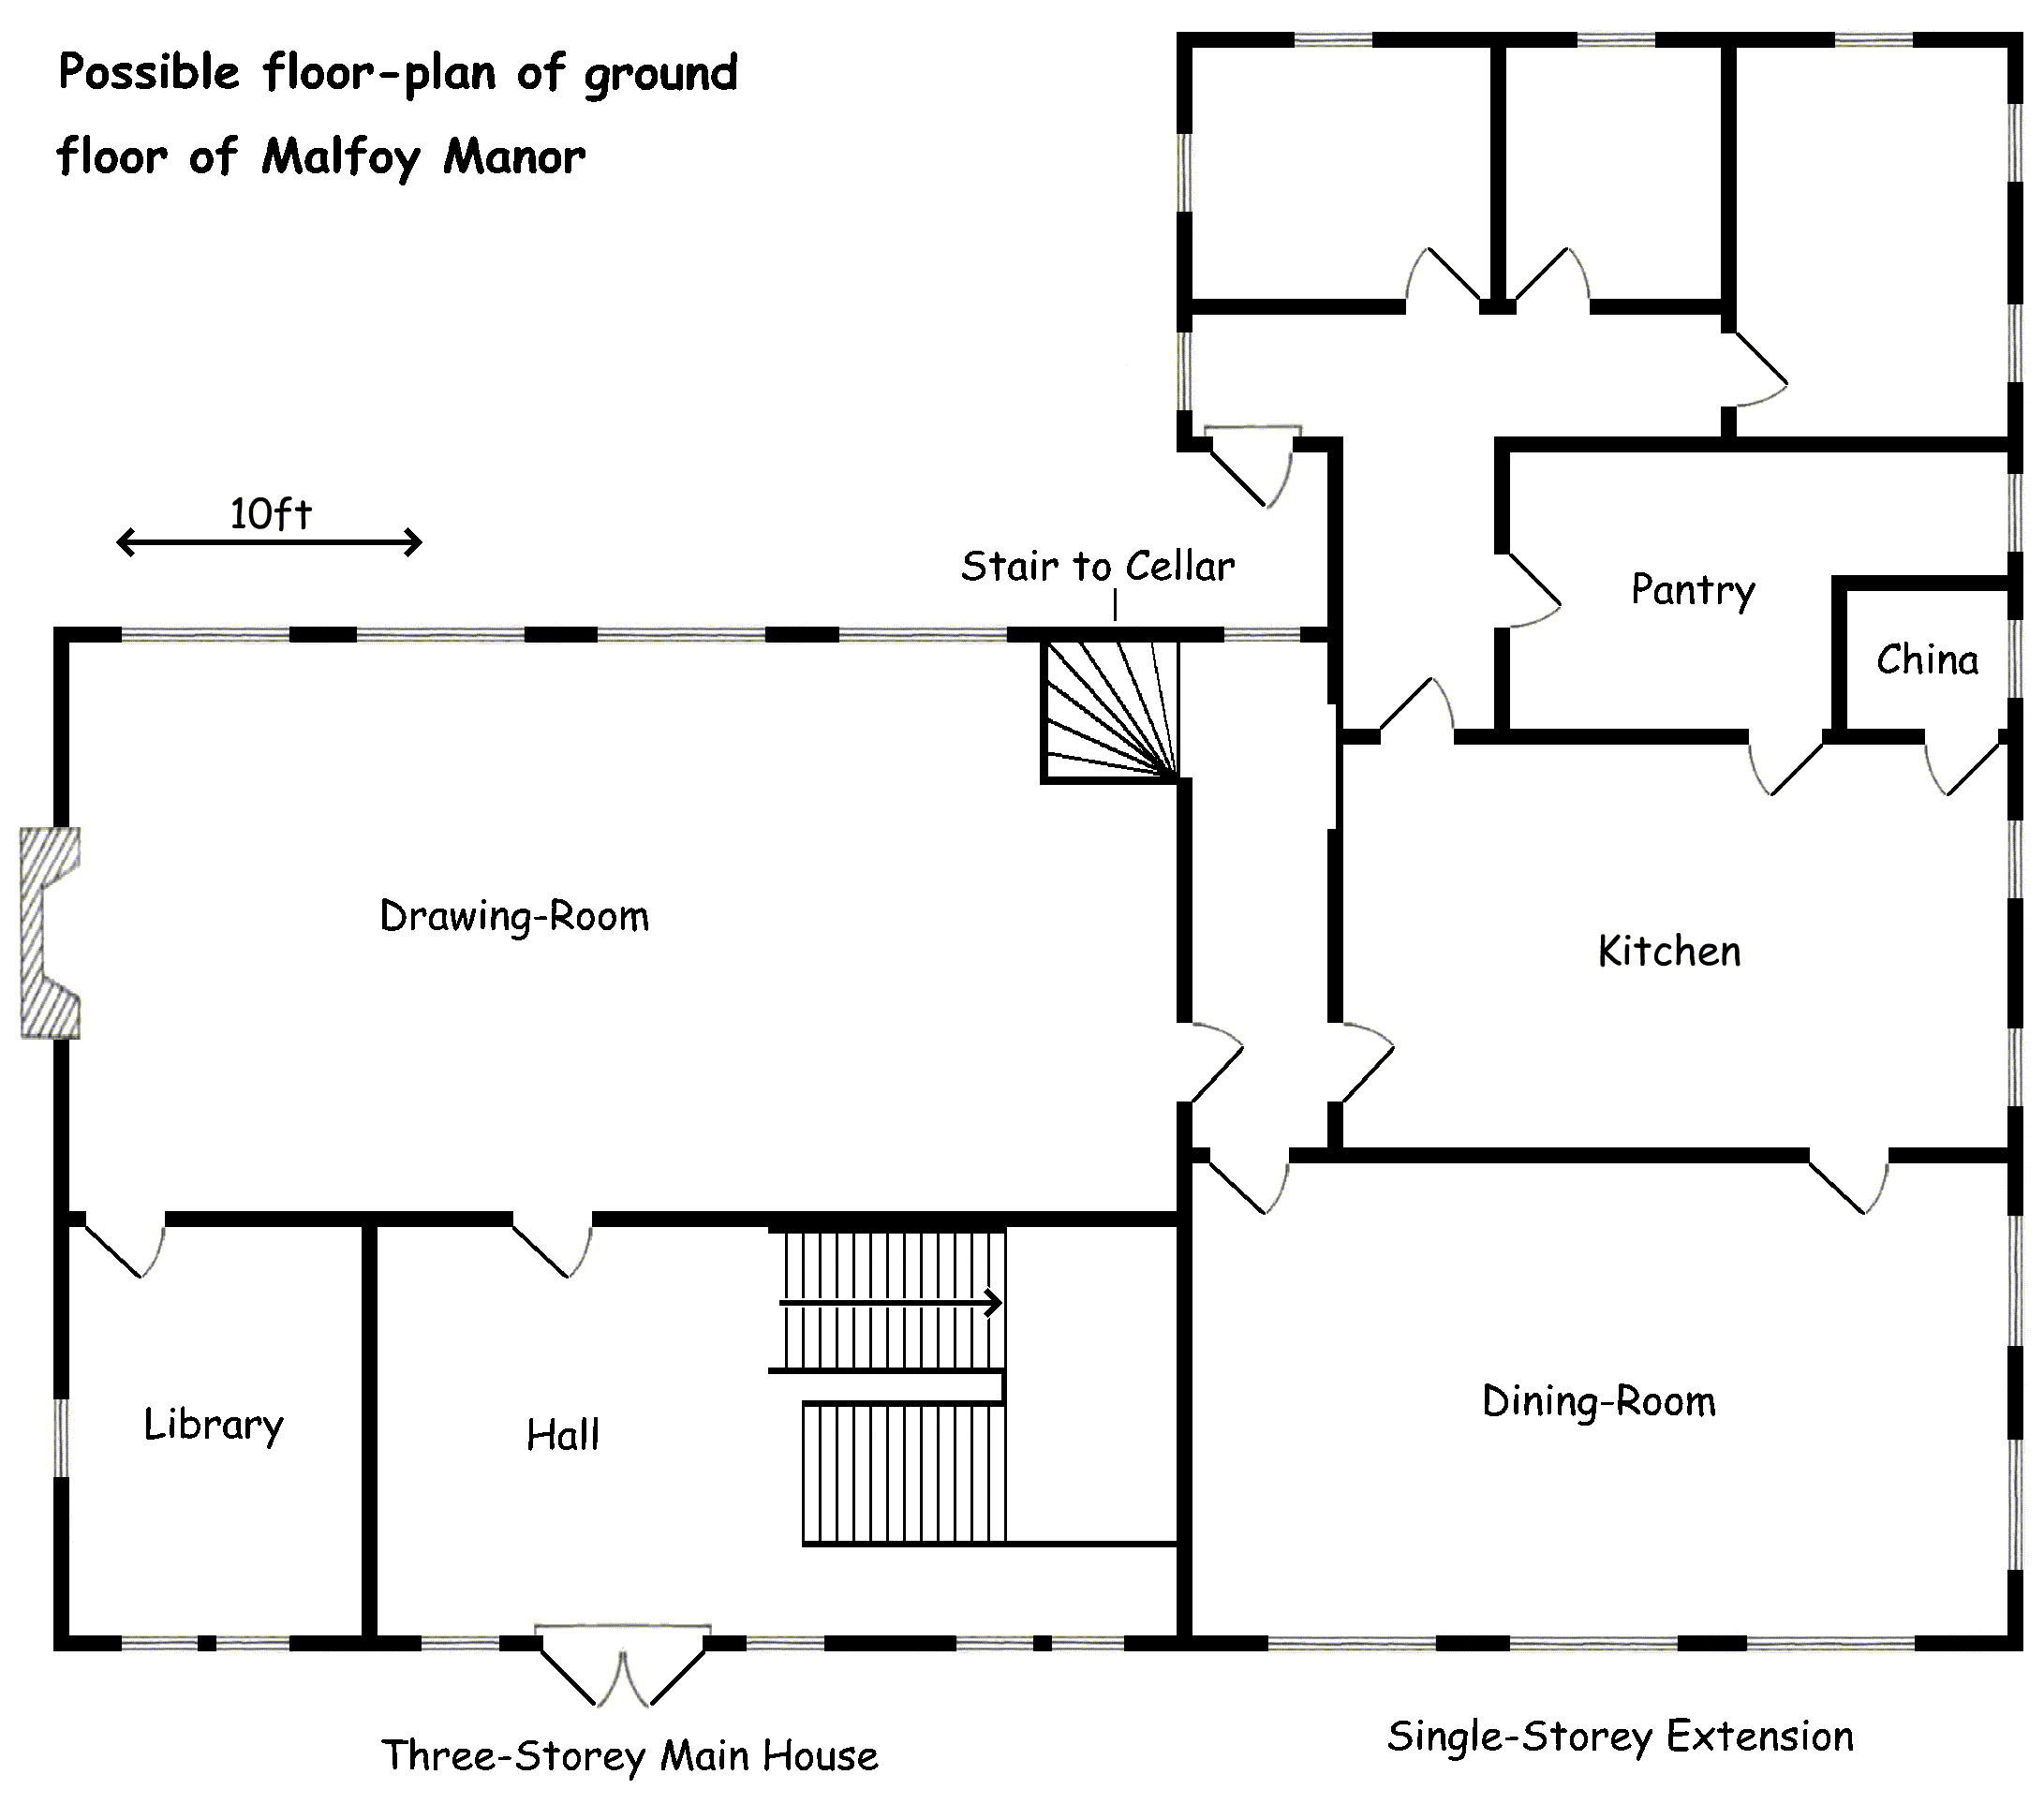 floor-plan showing extension at side